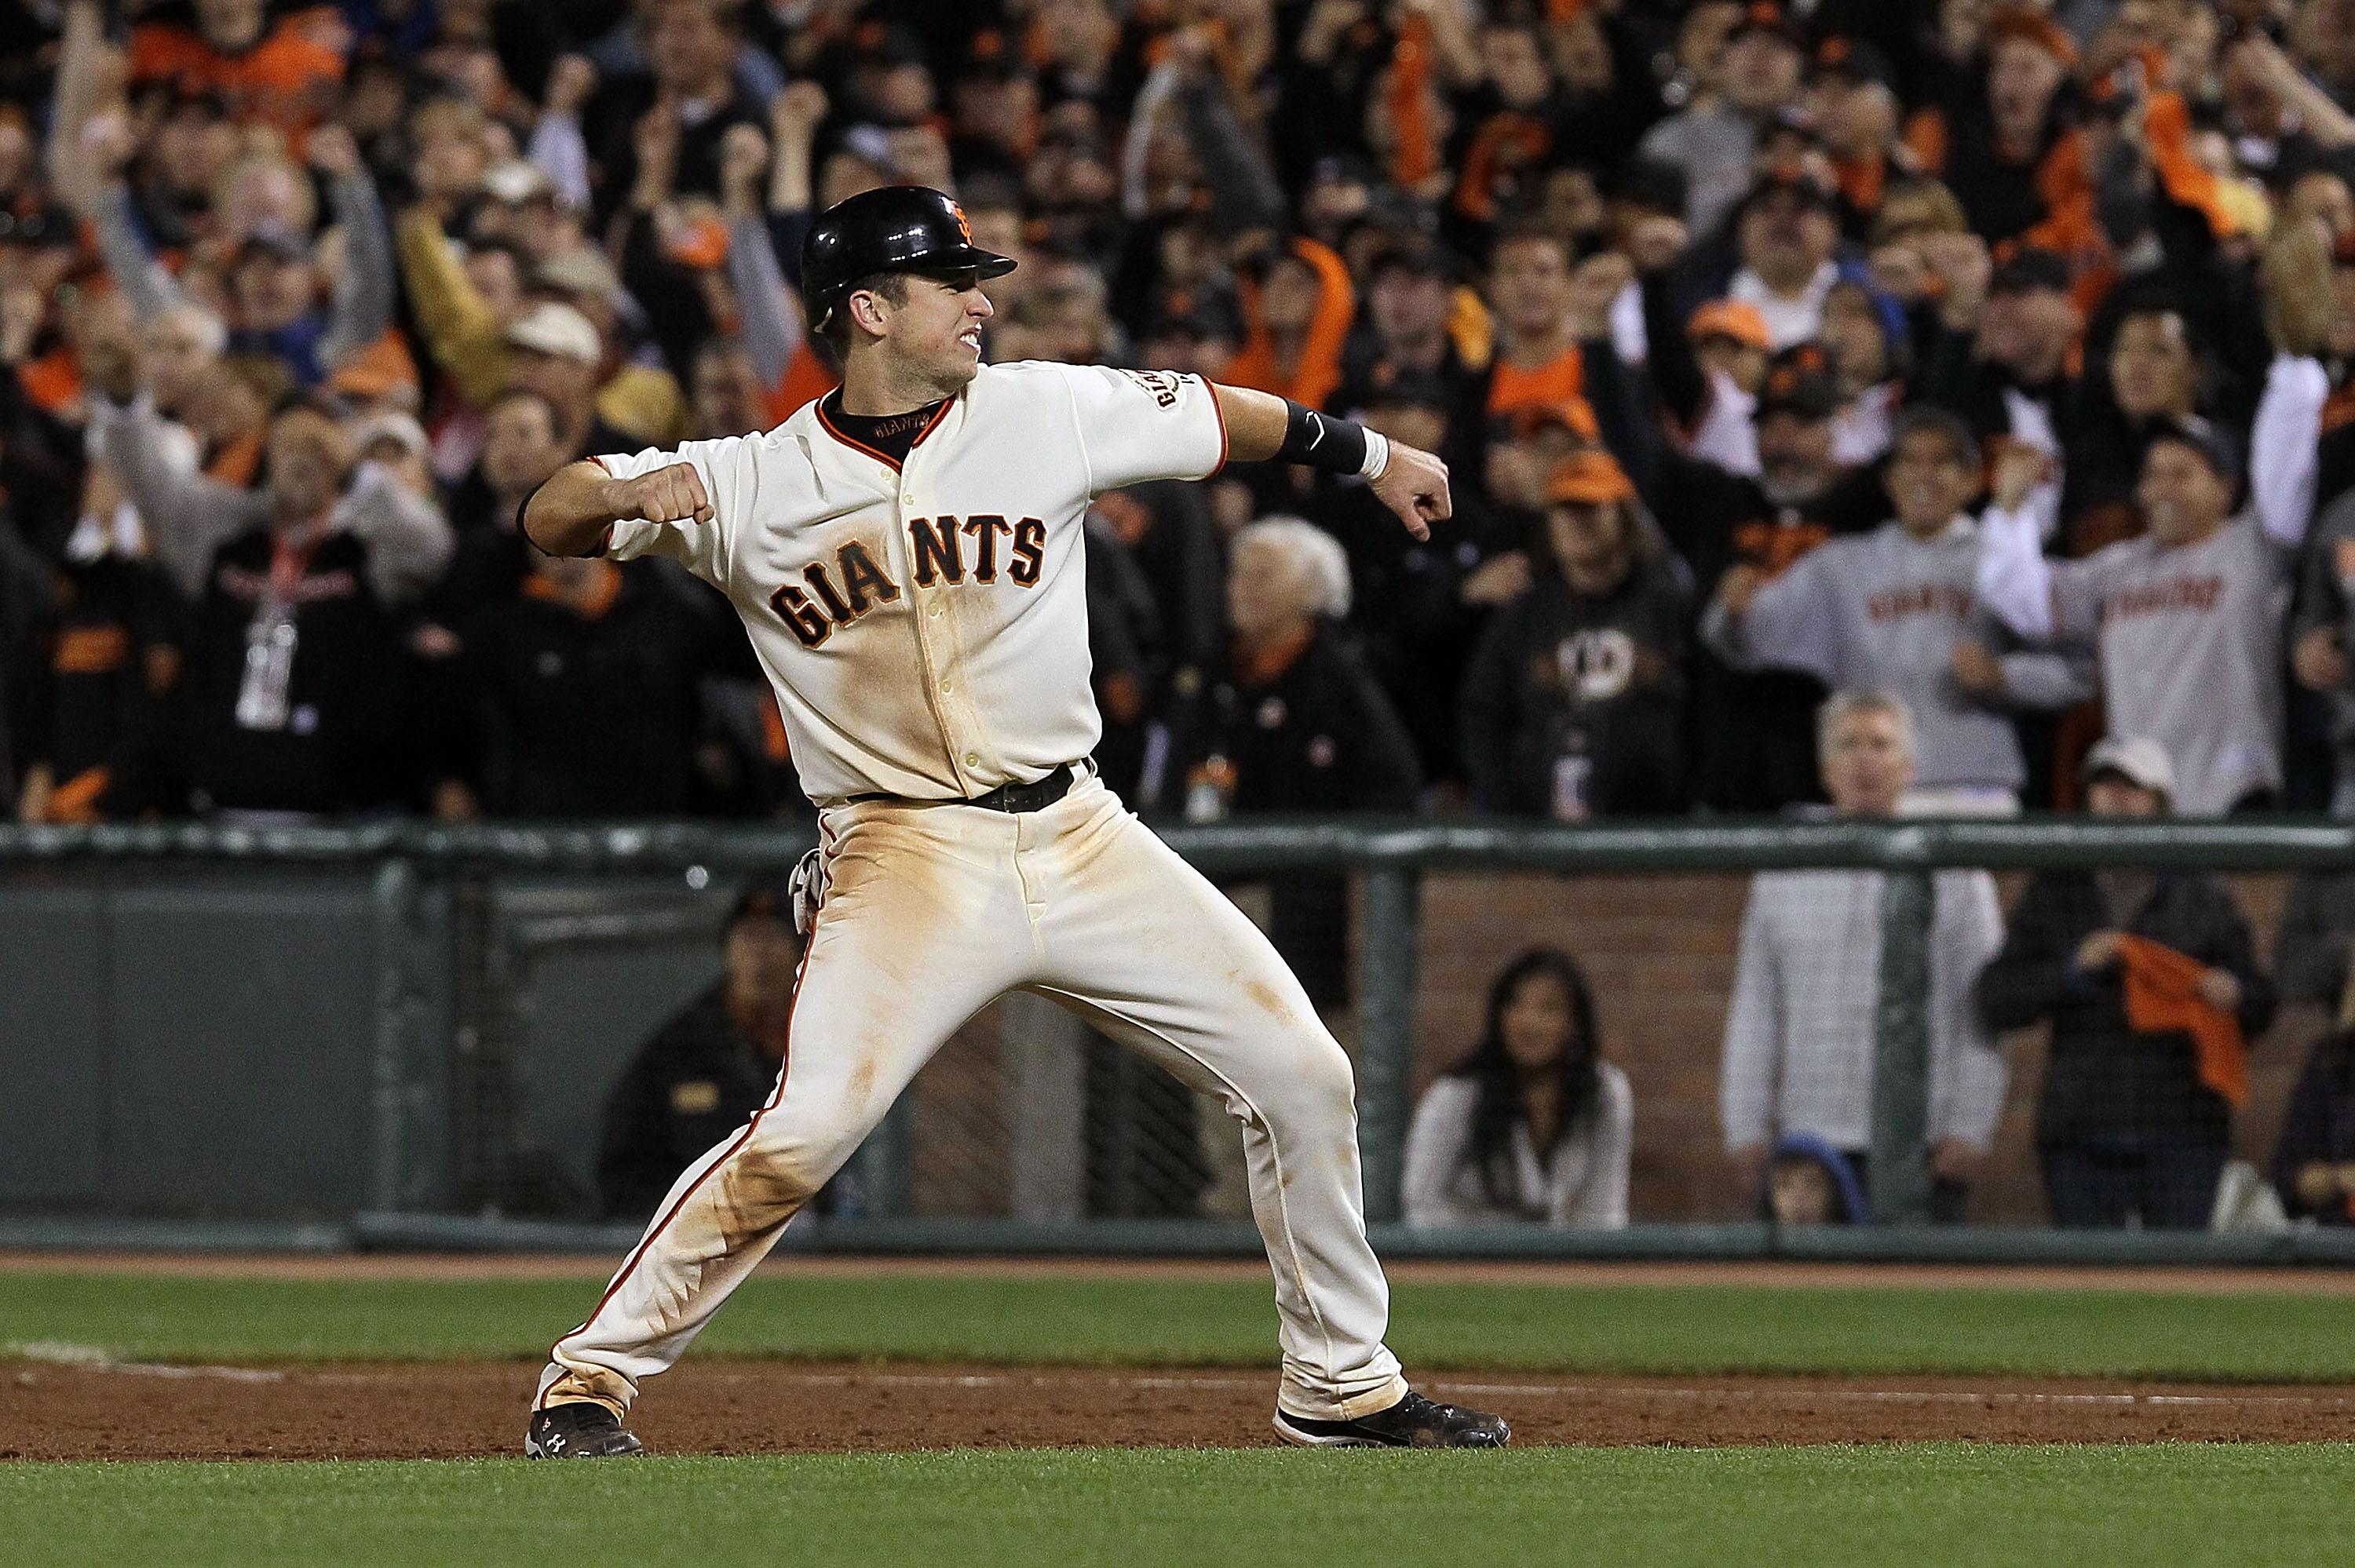 Buster Posey: Highlights of the San Francisco Giants Catcher's